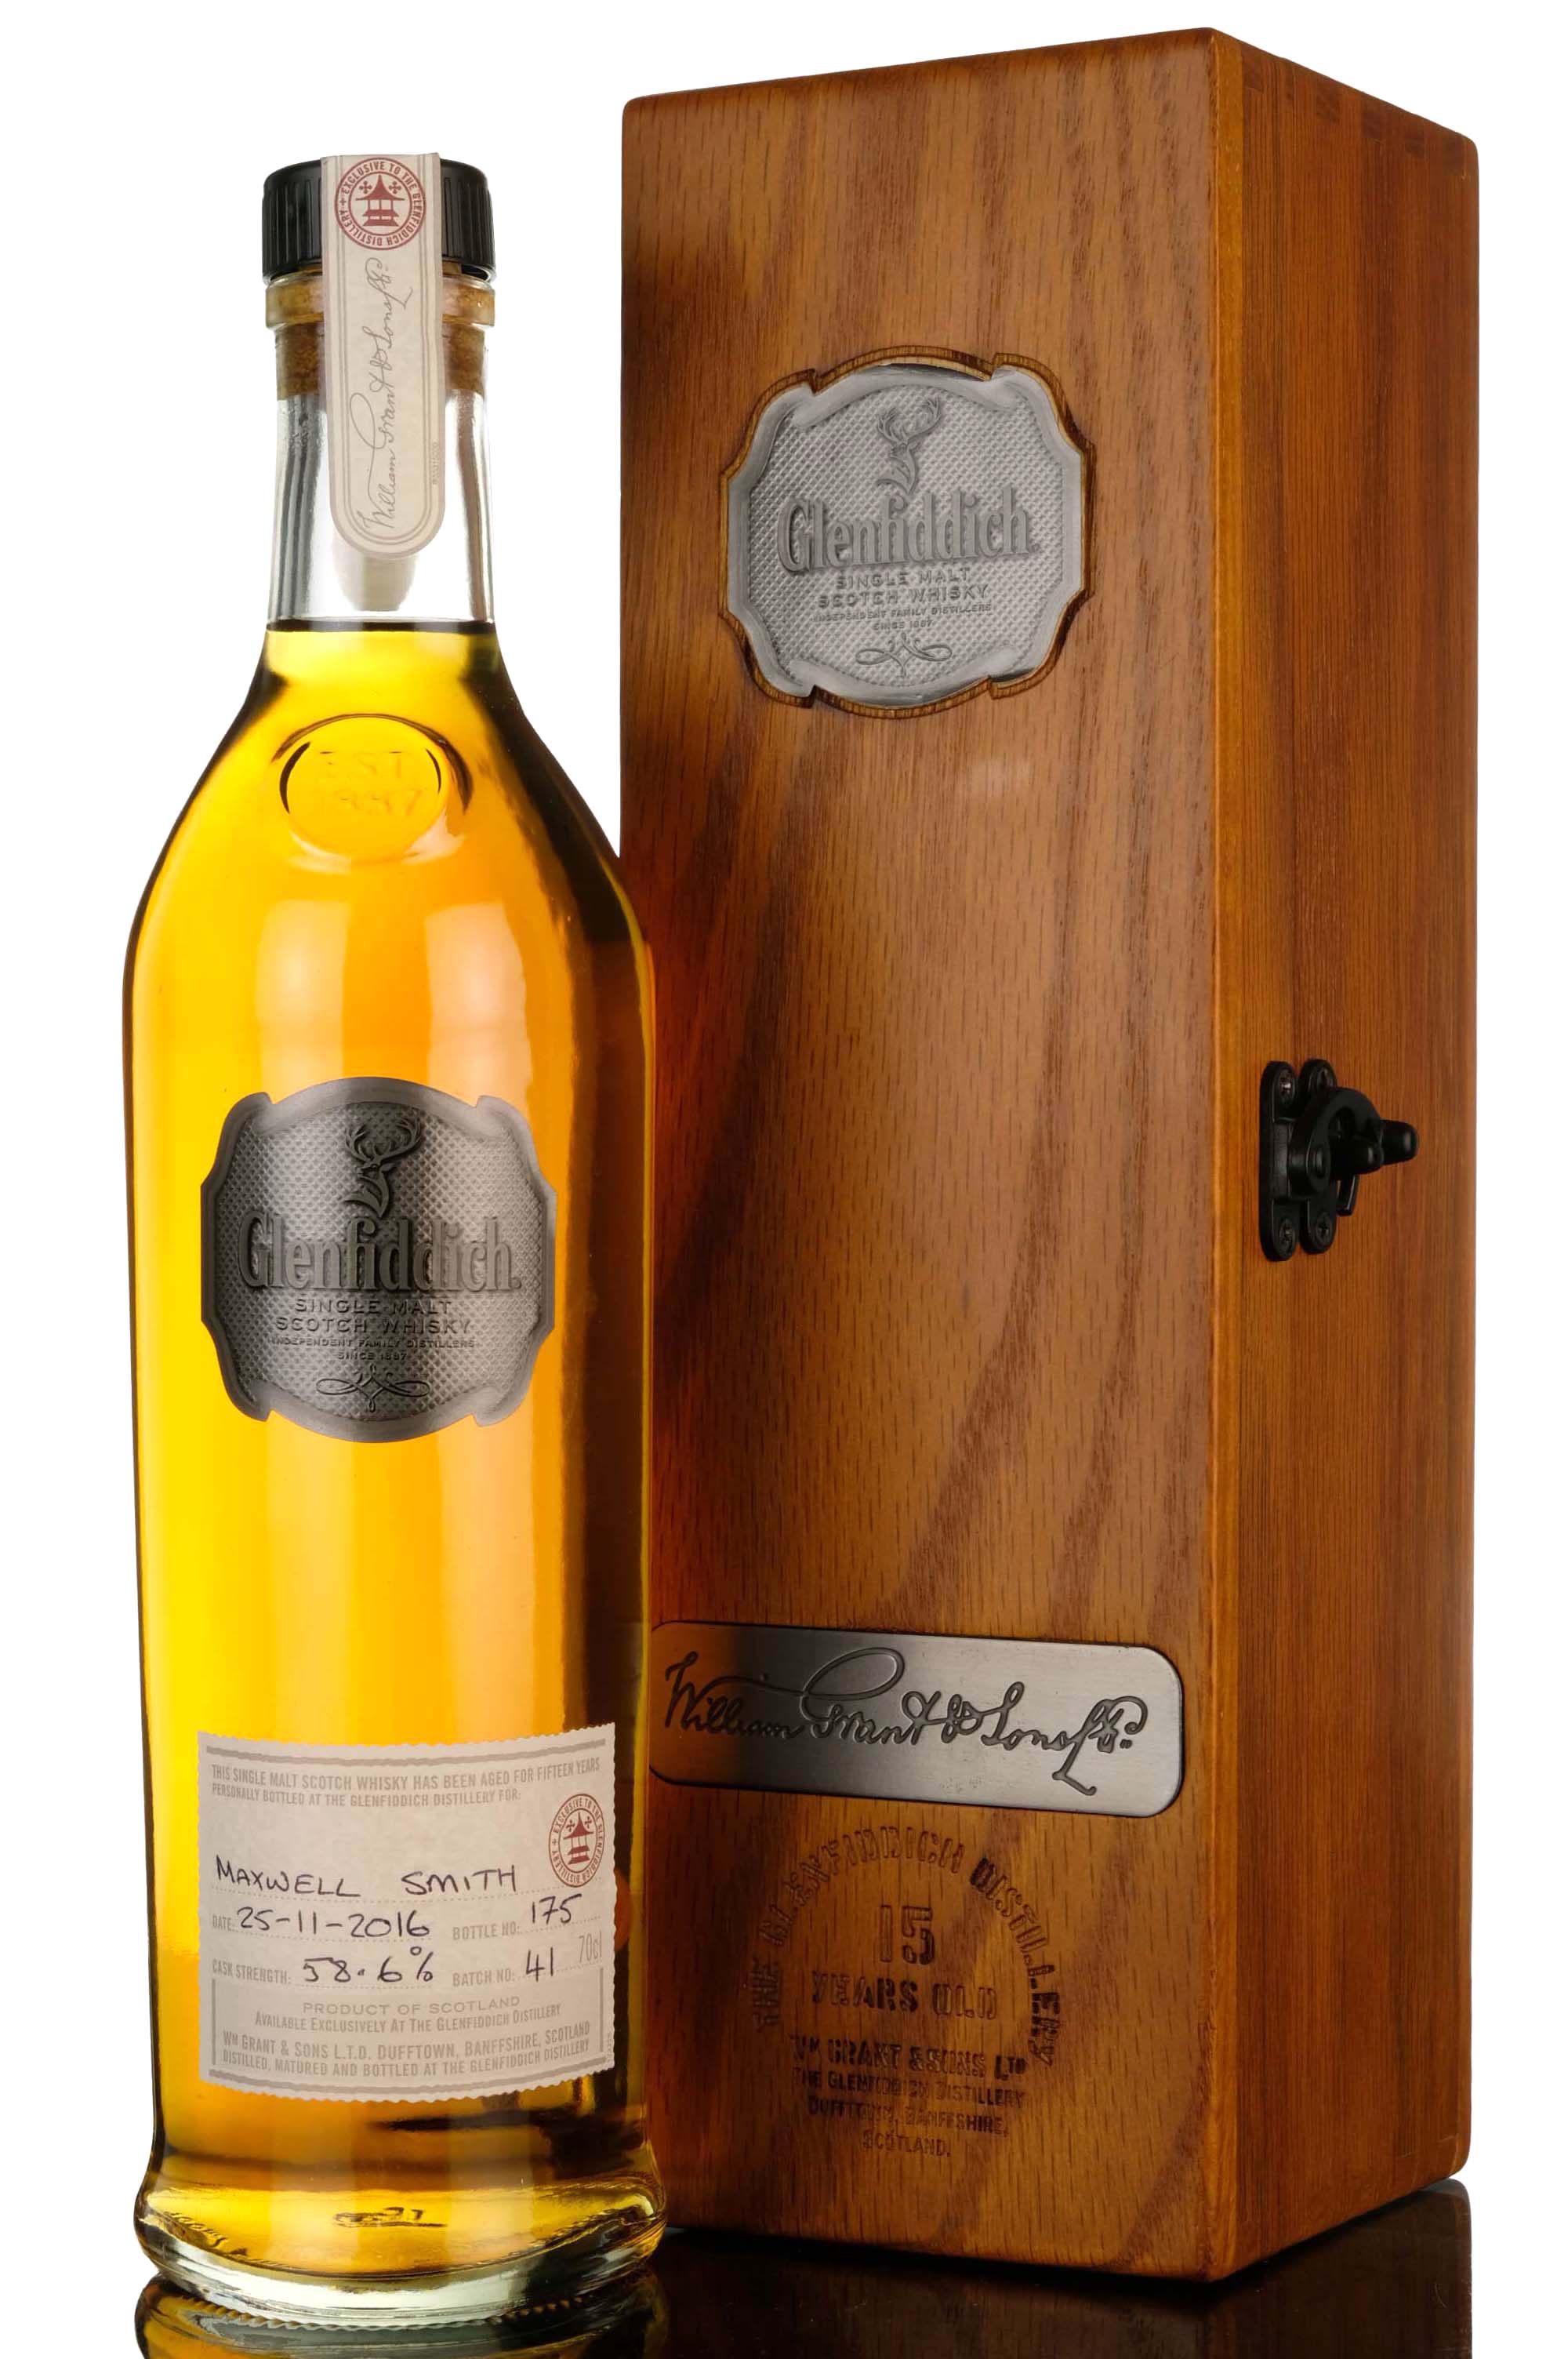 Glenfiddich 15 Year Old - Batch 41 - 2016 Release - Hand Filled